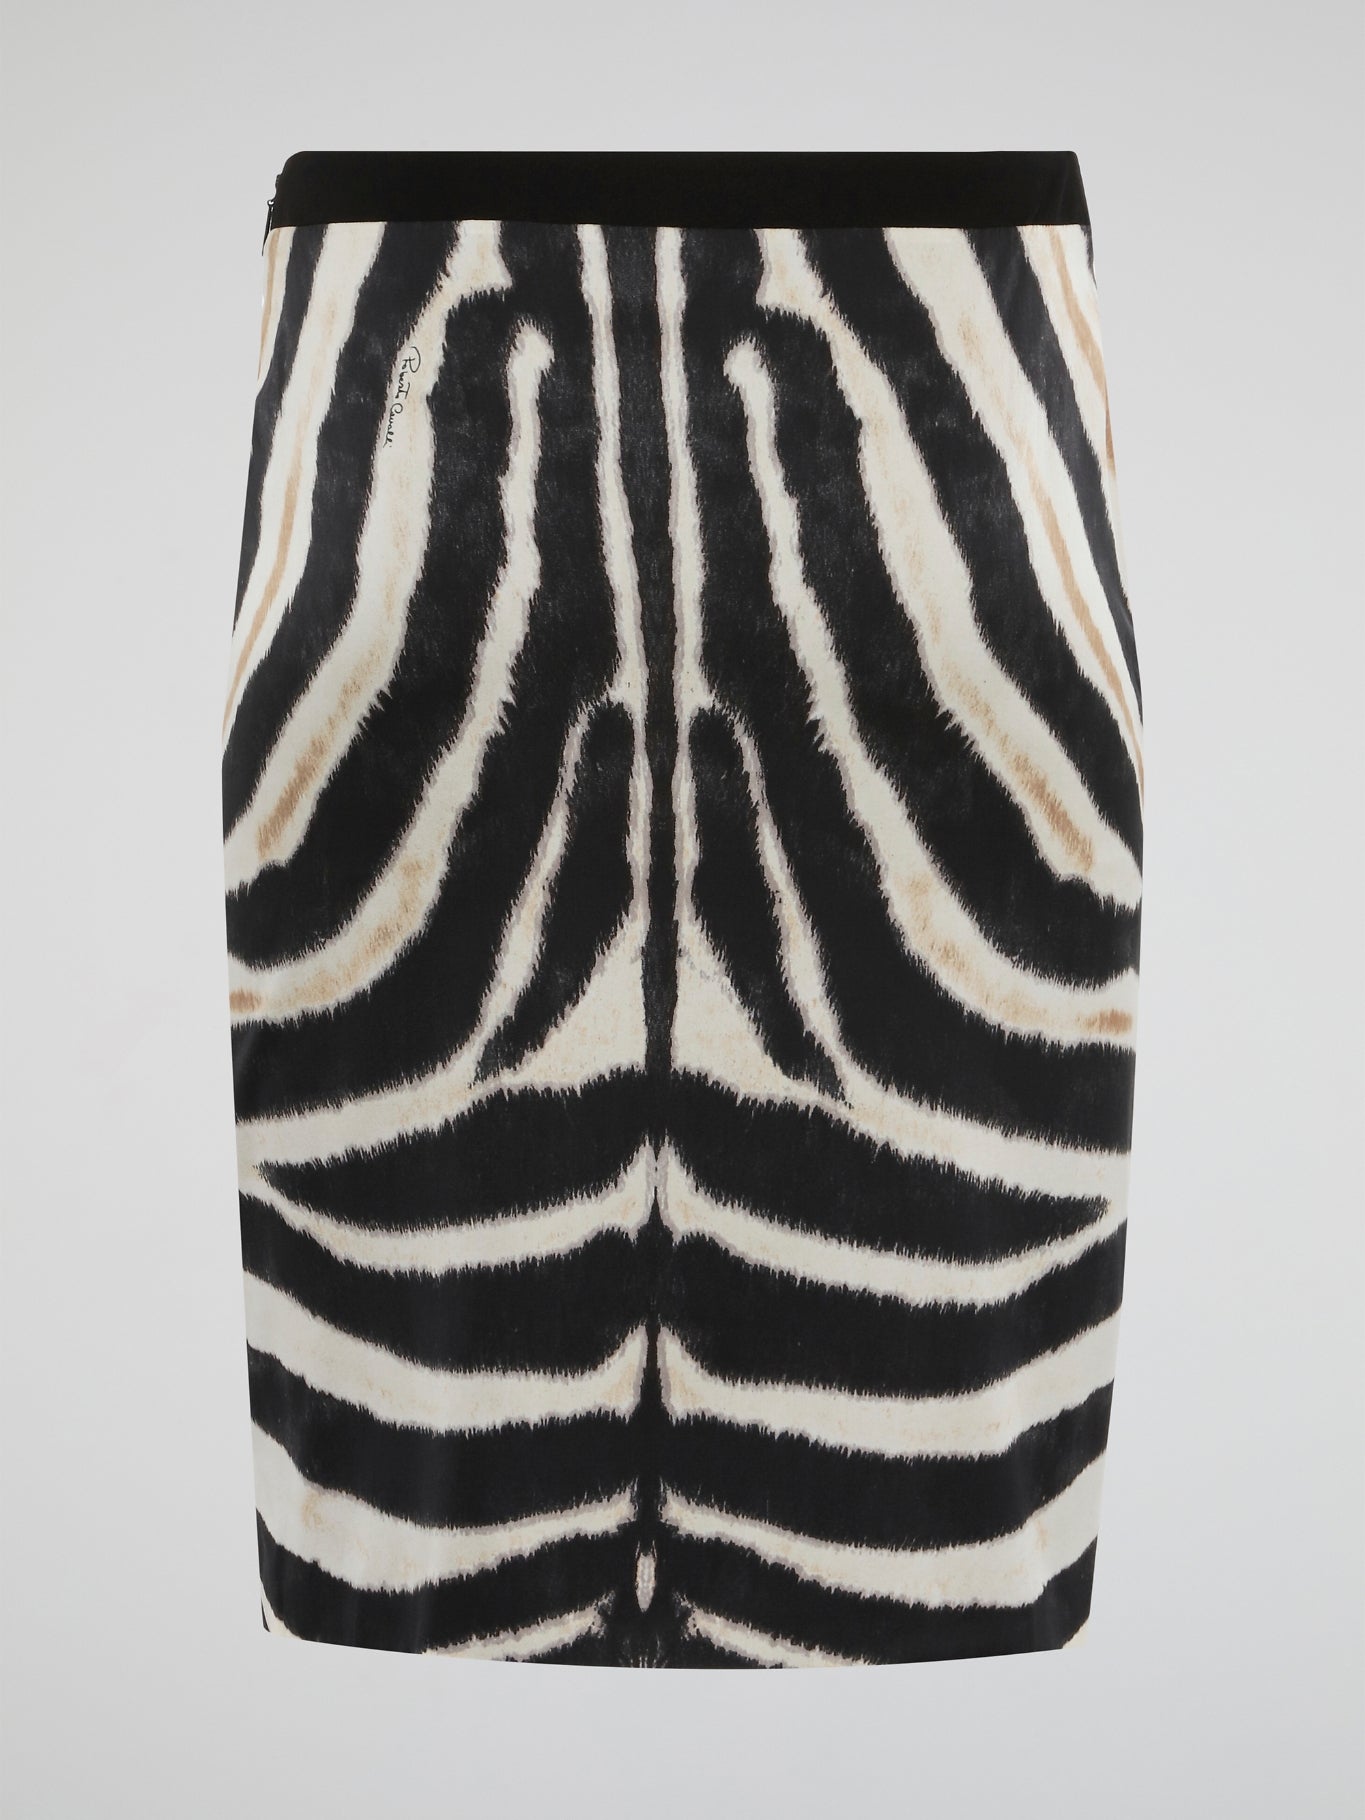 Unleash your wild side with this stunning Animal Print Pencil Skirt by Roberto Cavalli. Crafted with luxurious materials and a flawless silhouette, this skirt will make you feel fierce and fabulous. Whether you're in the office or hitting the town, this statement piece is sure to turn heads wherever you go.